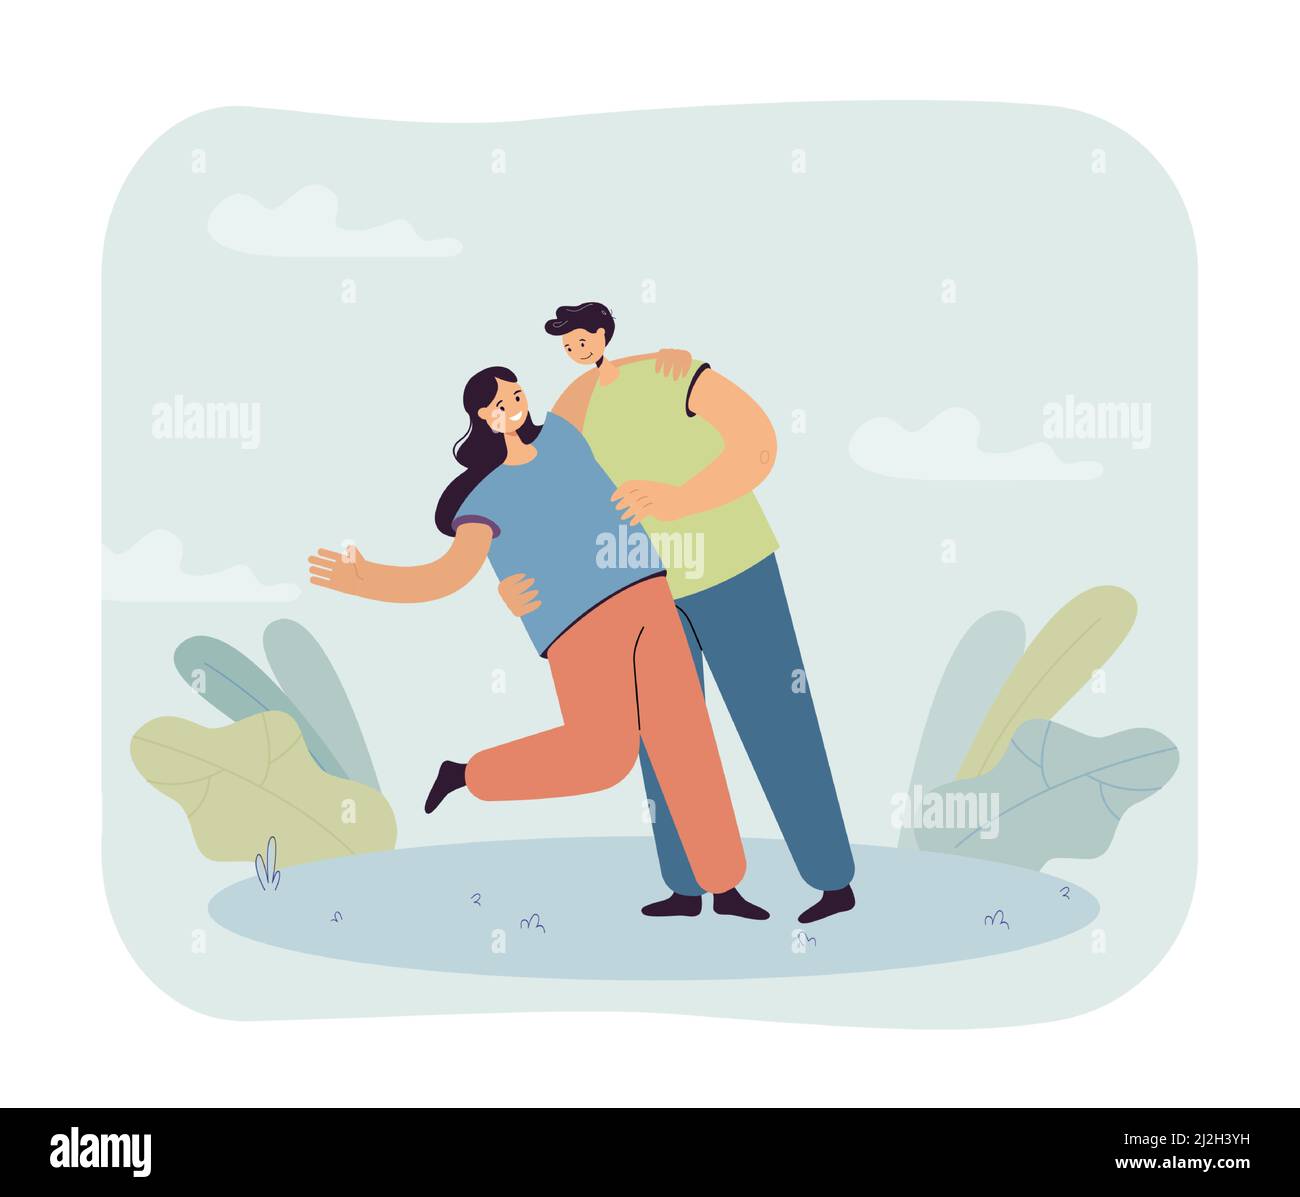 Boyfriend holding girlfriend romantically. Happy couple, male and female characters on date flat vector illustration. Romance, relationship concept fo Stock Vector